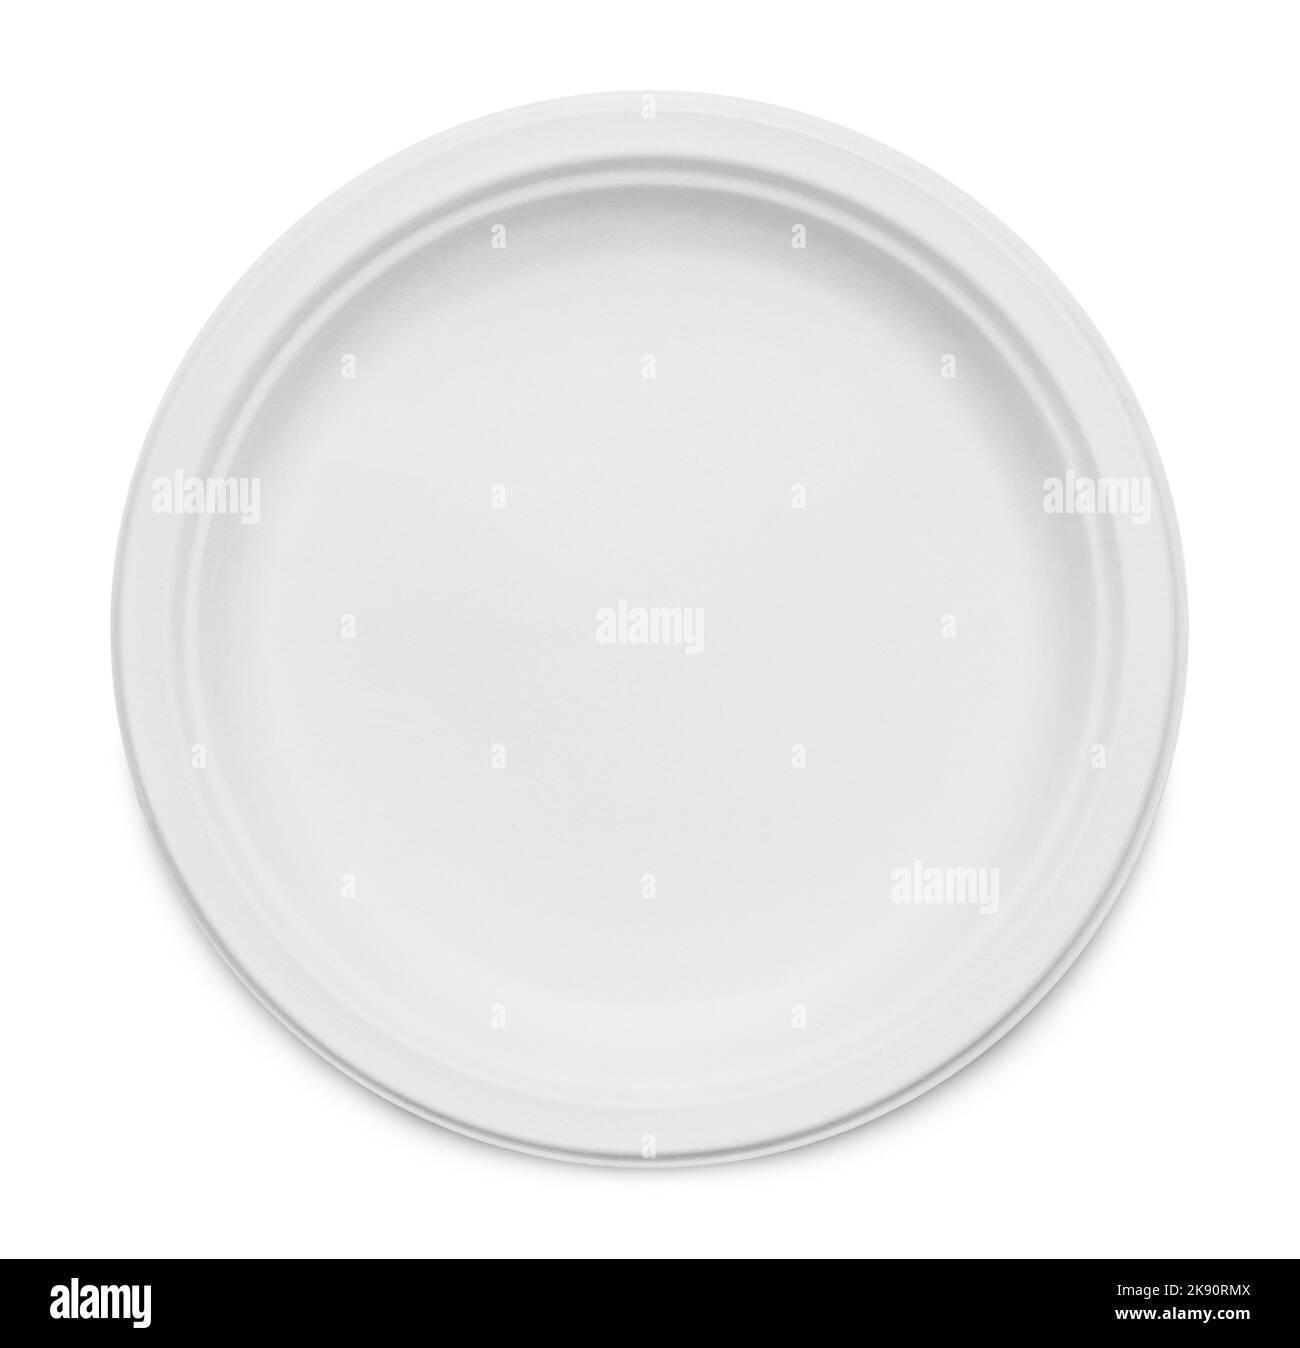 Heavy Duty Paper Plate Cut Out on White. Stock Photo